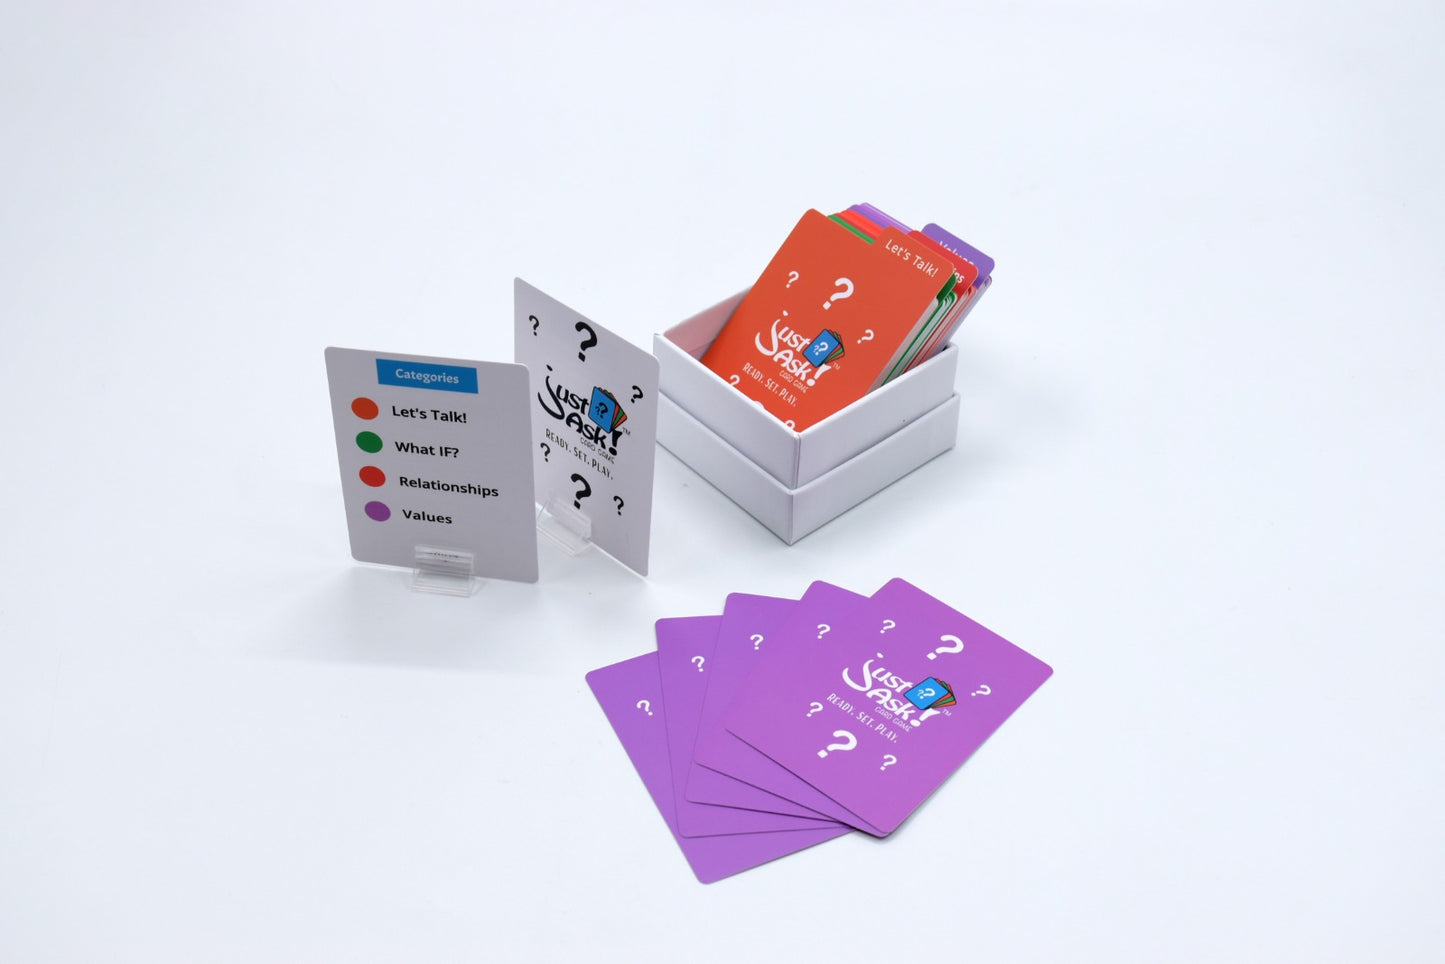 Ready, Set, Just Ask! Card Game (English)